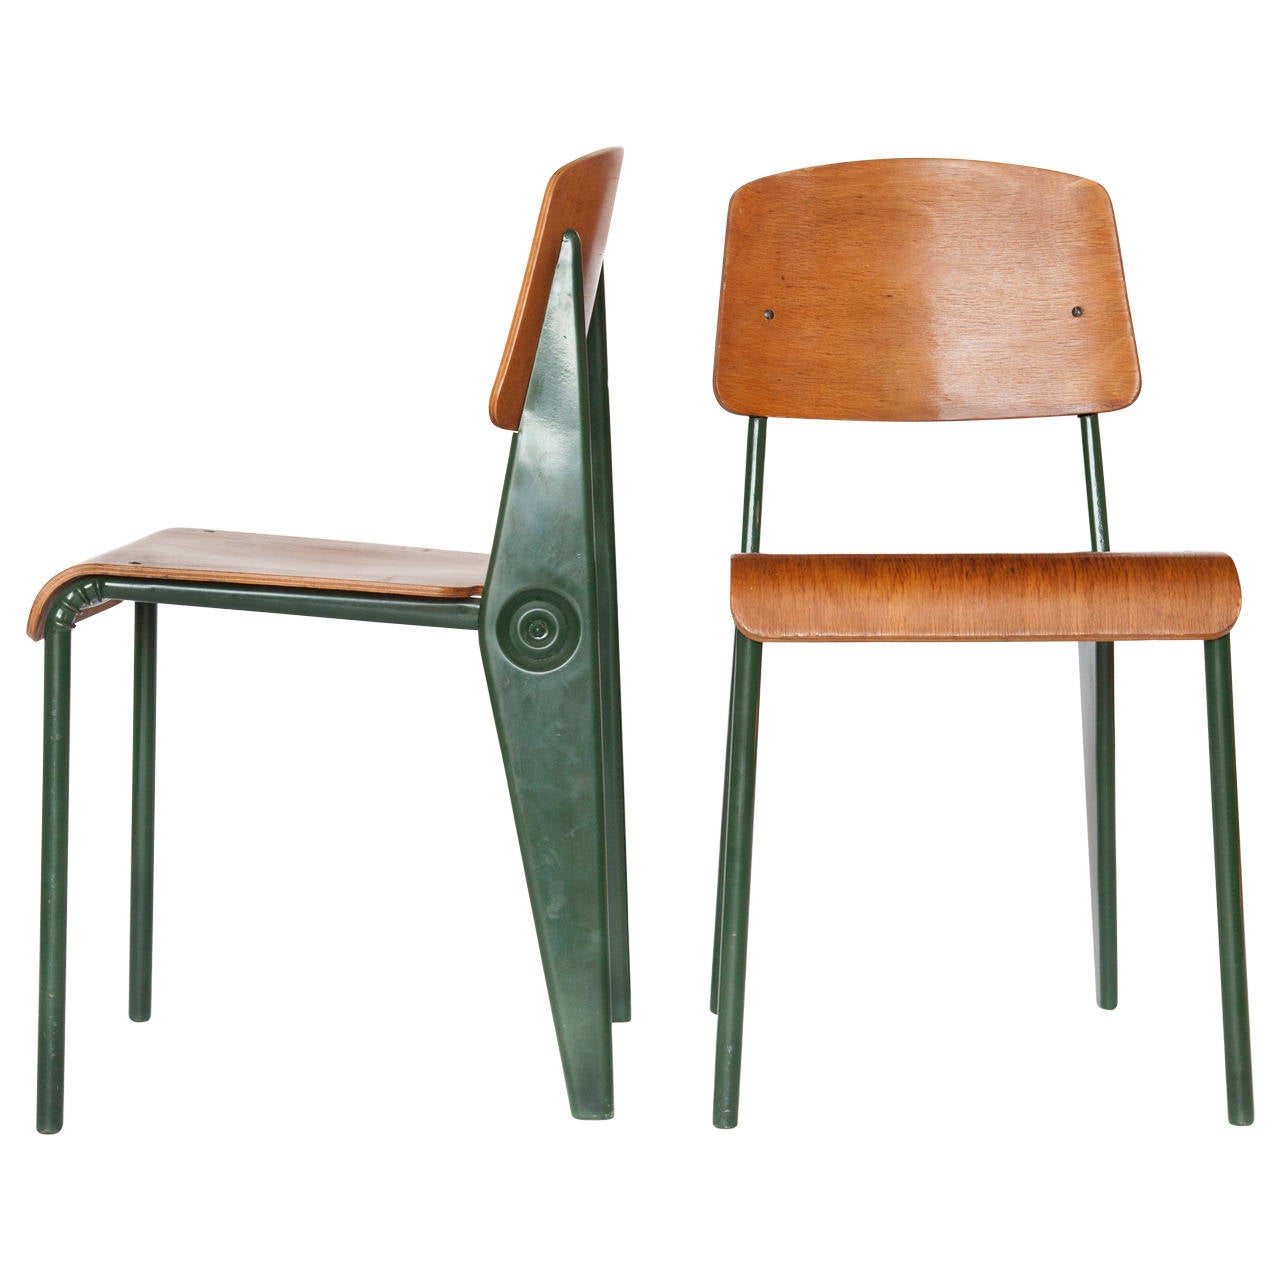 Pair of Rare Model No. 300 Demountable Chairs by Jean Prouvé at 1stDibs | jean  prouve chair vintage, demountable furniture, prouve chair